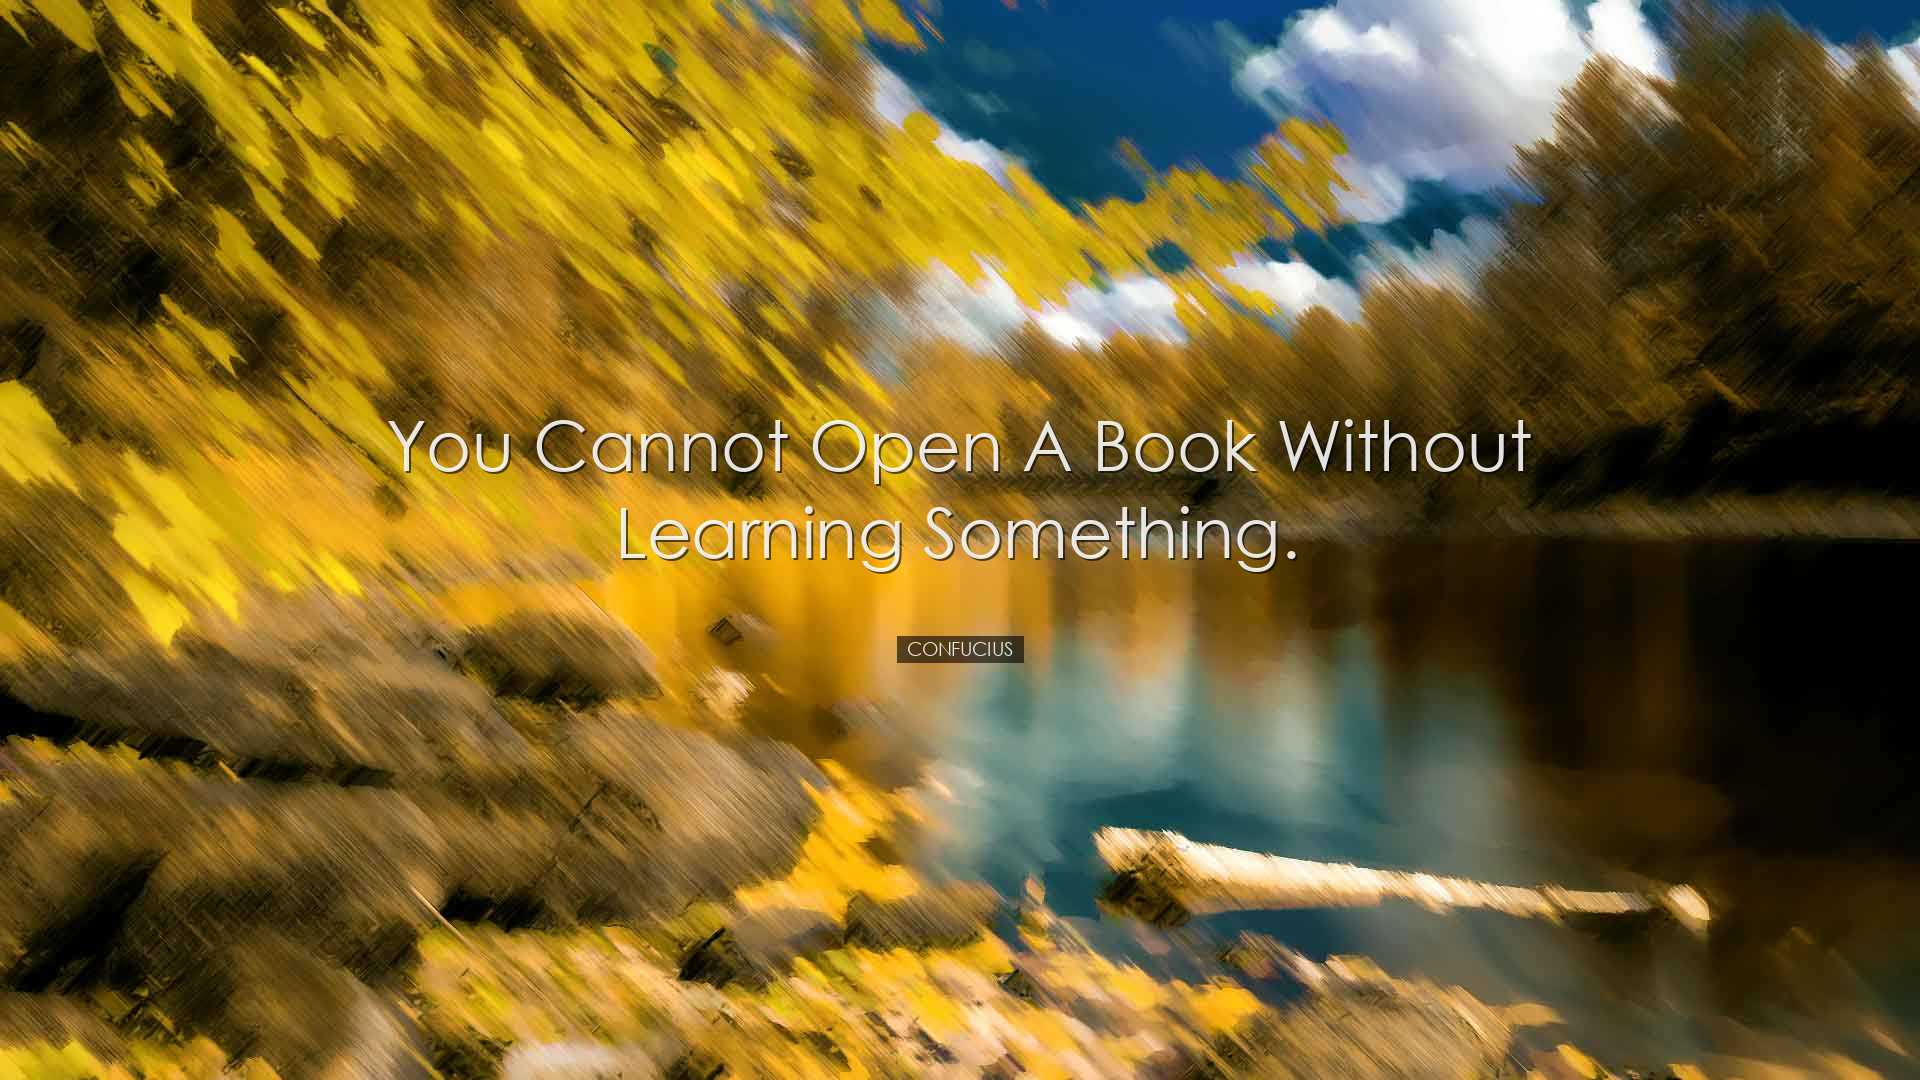 You cannot open a book without learning something. - Confucius